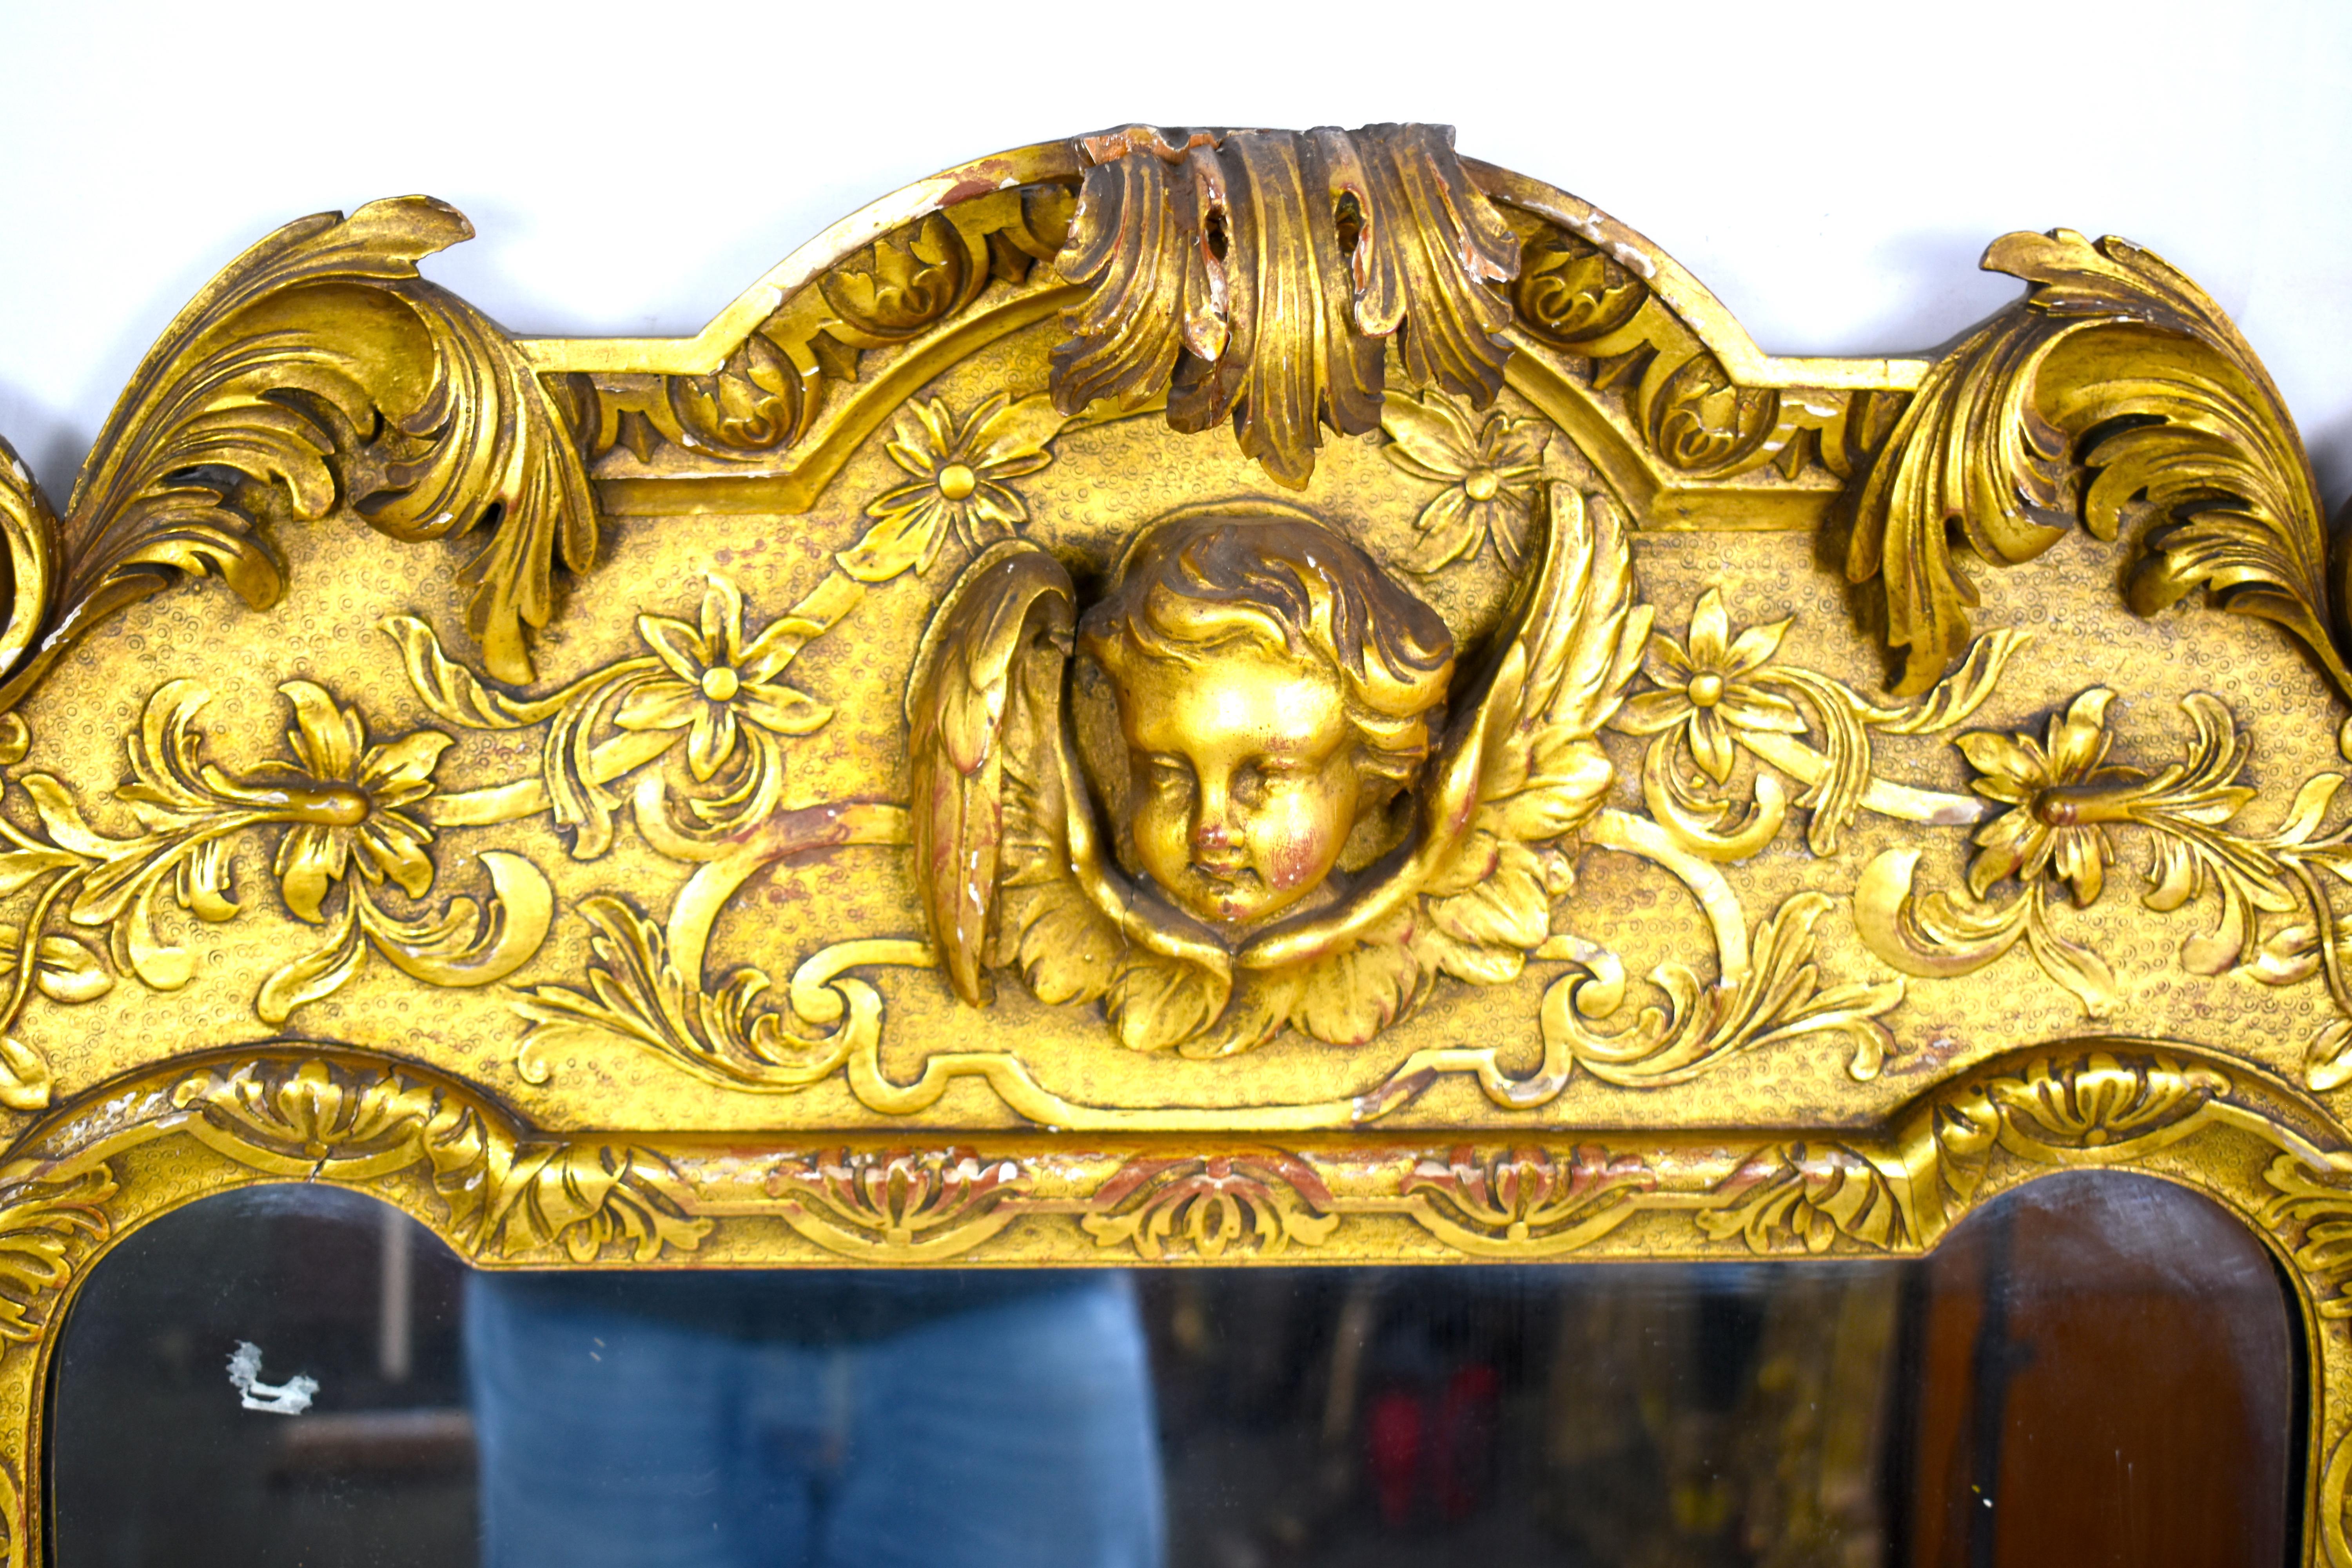 A French carved wood and gilt cherub acanthus wall mirror with a cherub head, encapsulated by fine carved floral. Either side sits the head of an eagle.